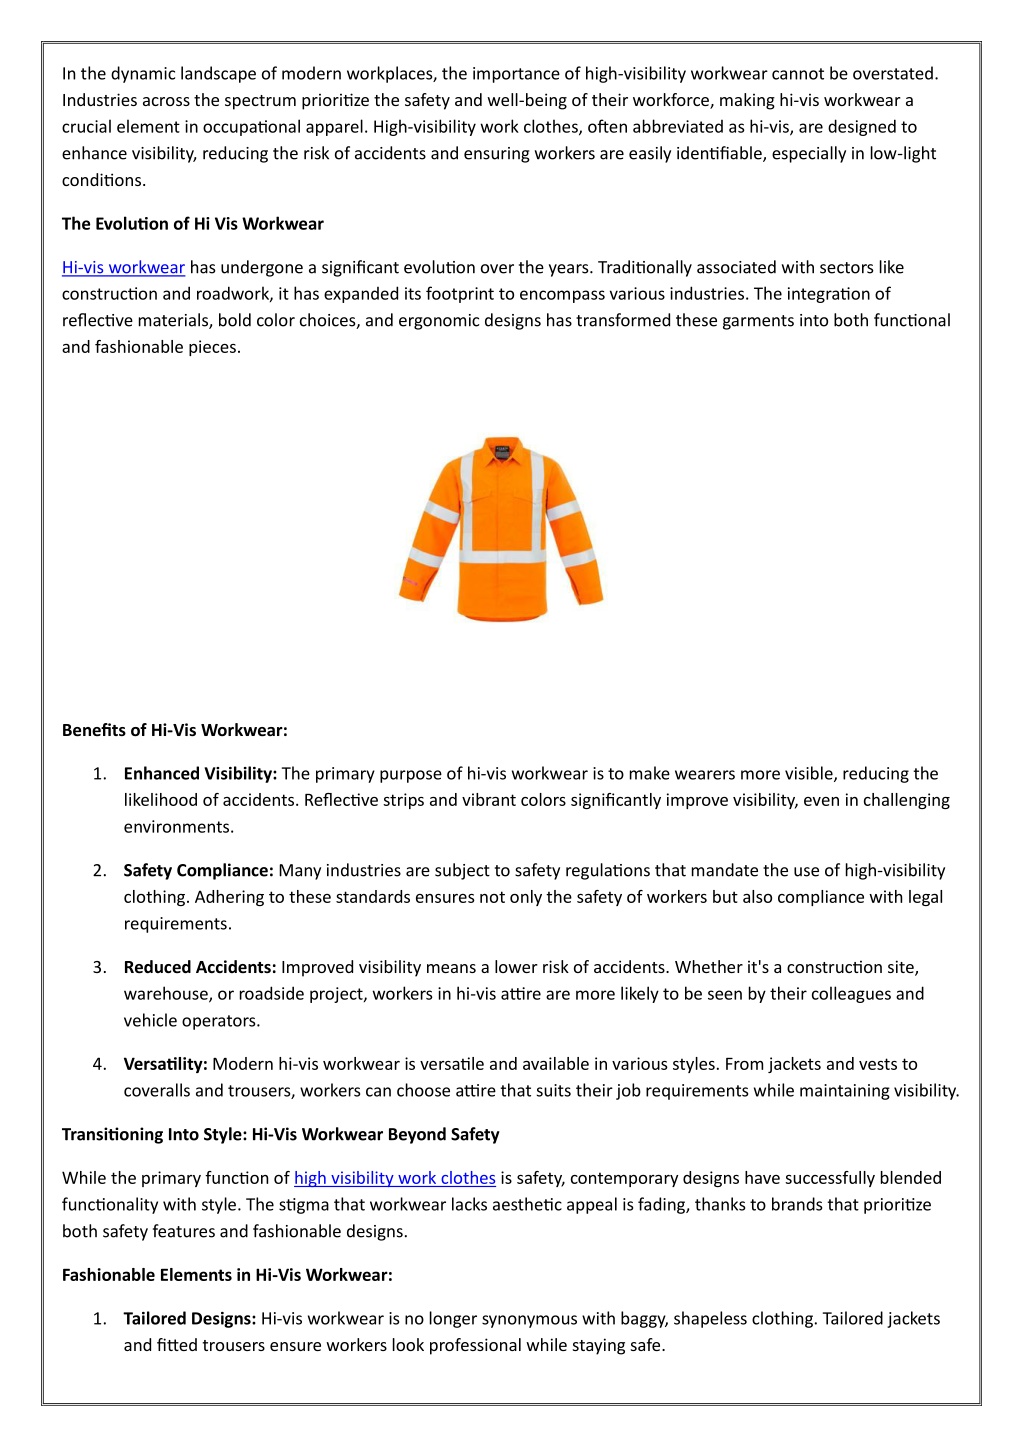 The evolution of high visibility protective workwear